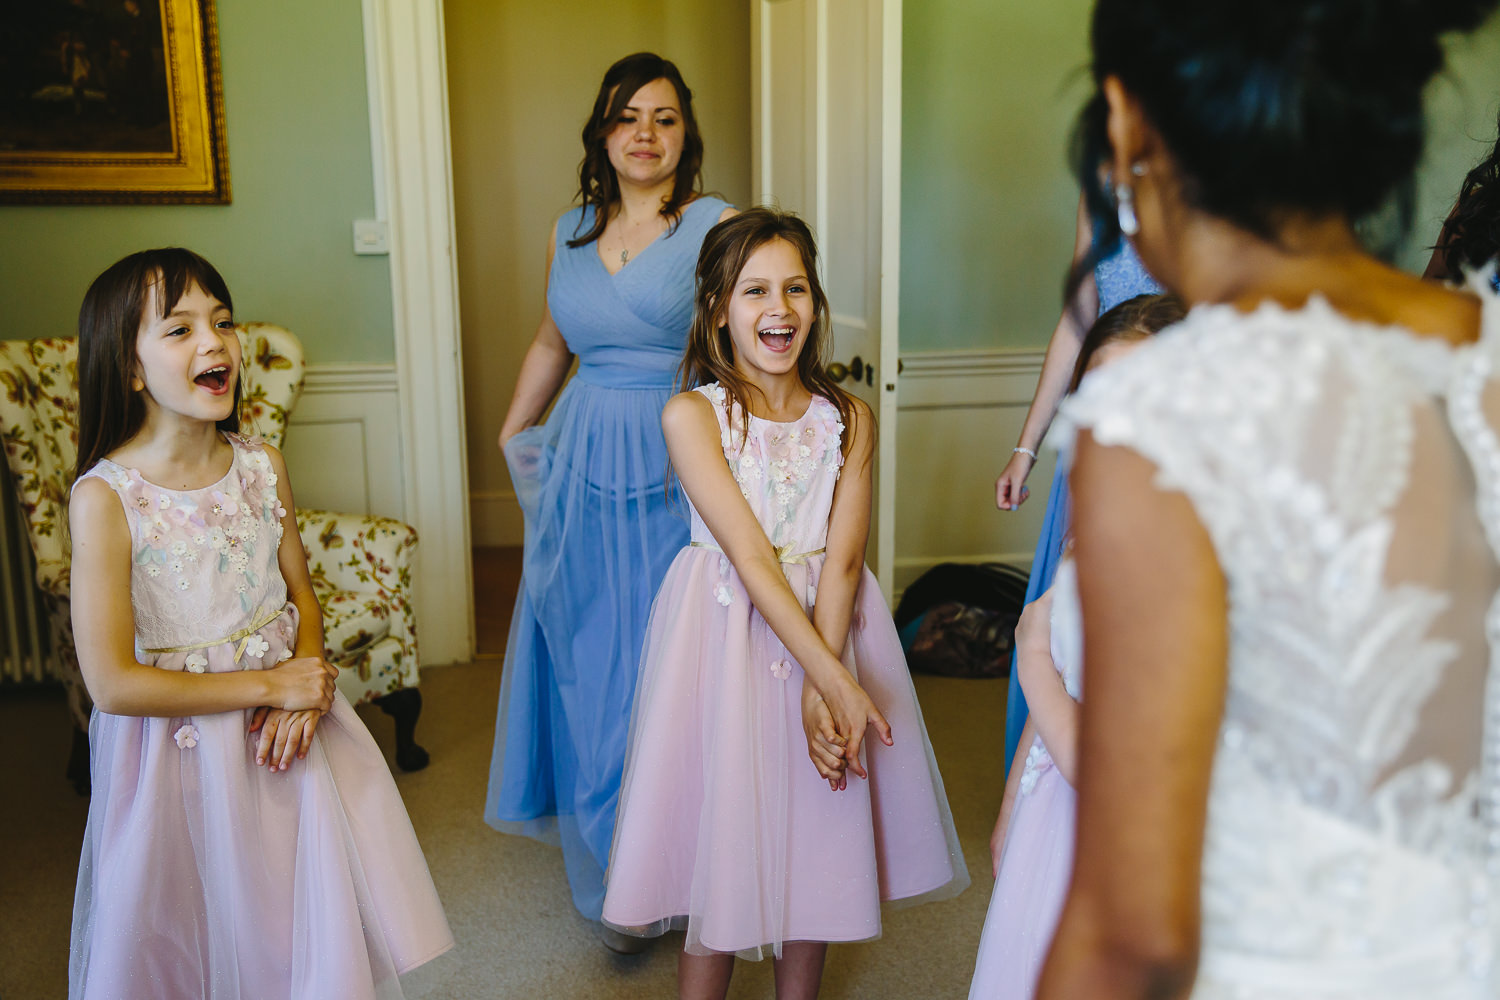 Bridesmaids and flower girls looking happy